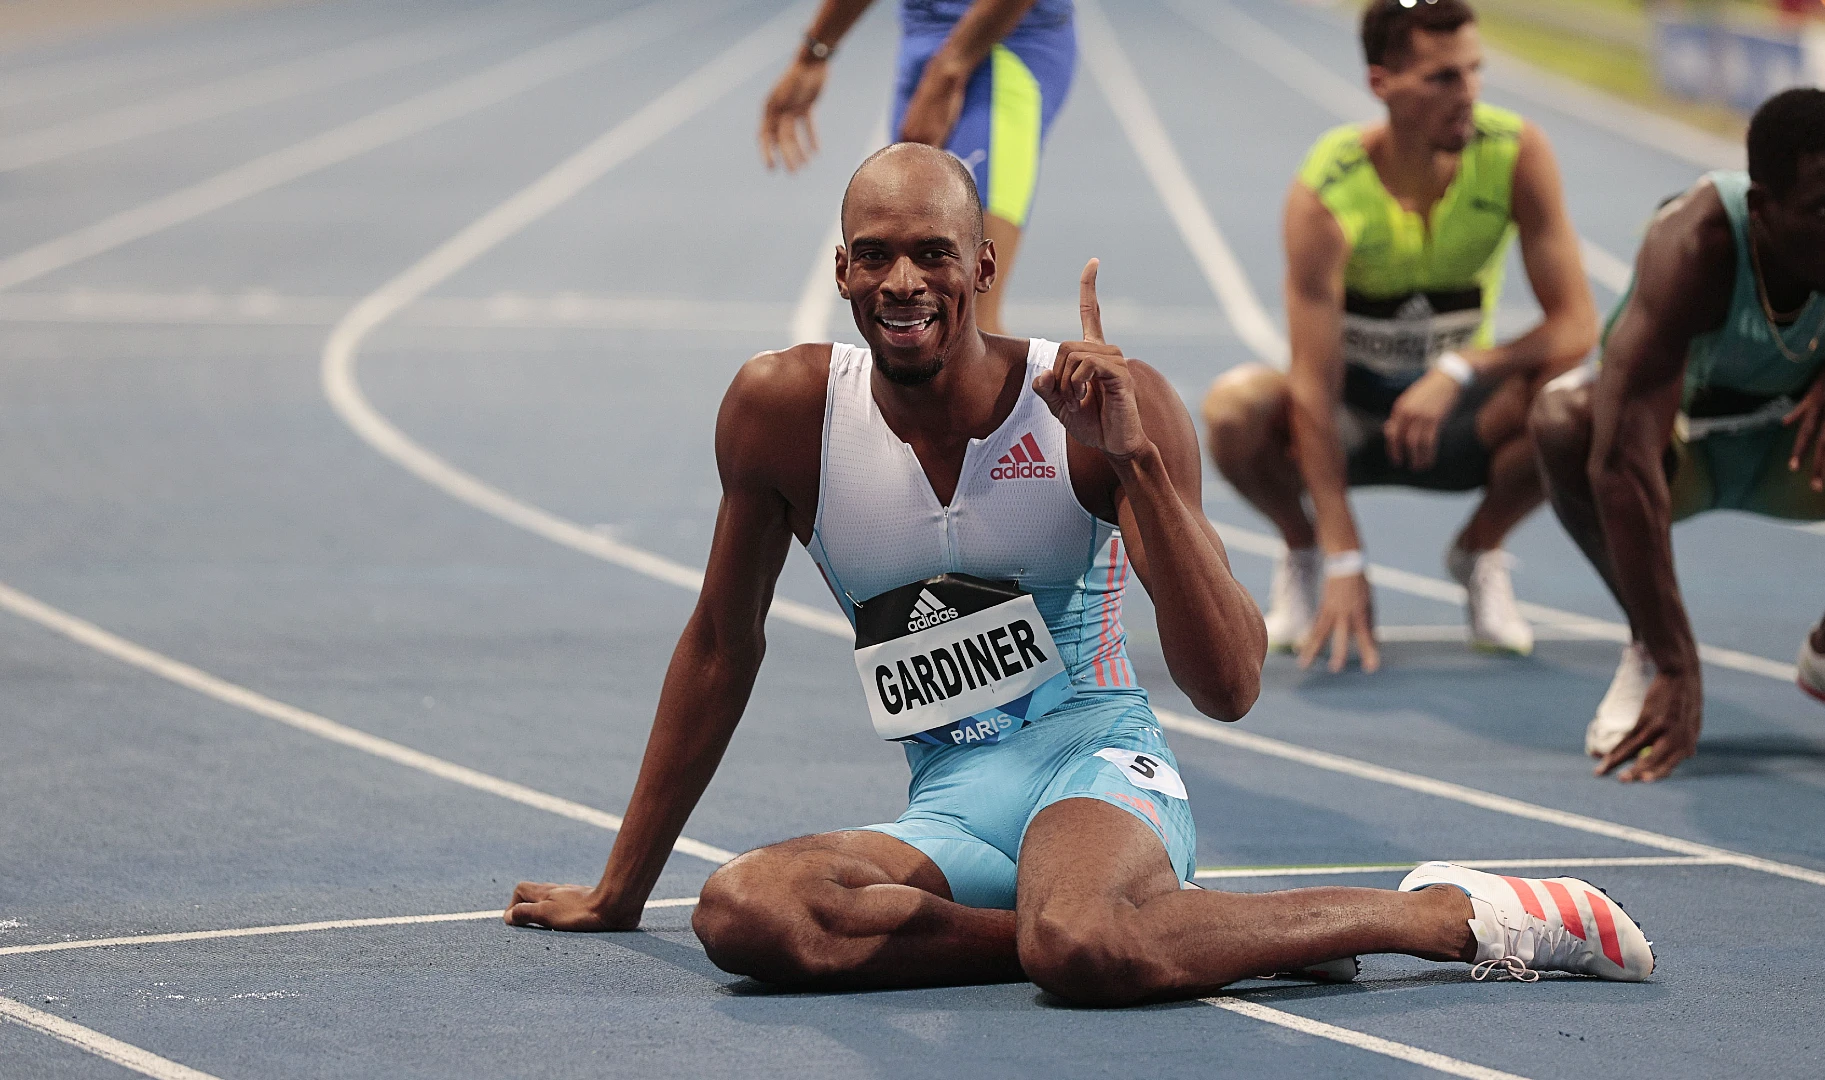 Bahamians Gardiner and Miller-Uibo cruised to 400m victories at Paris Diamond League meet